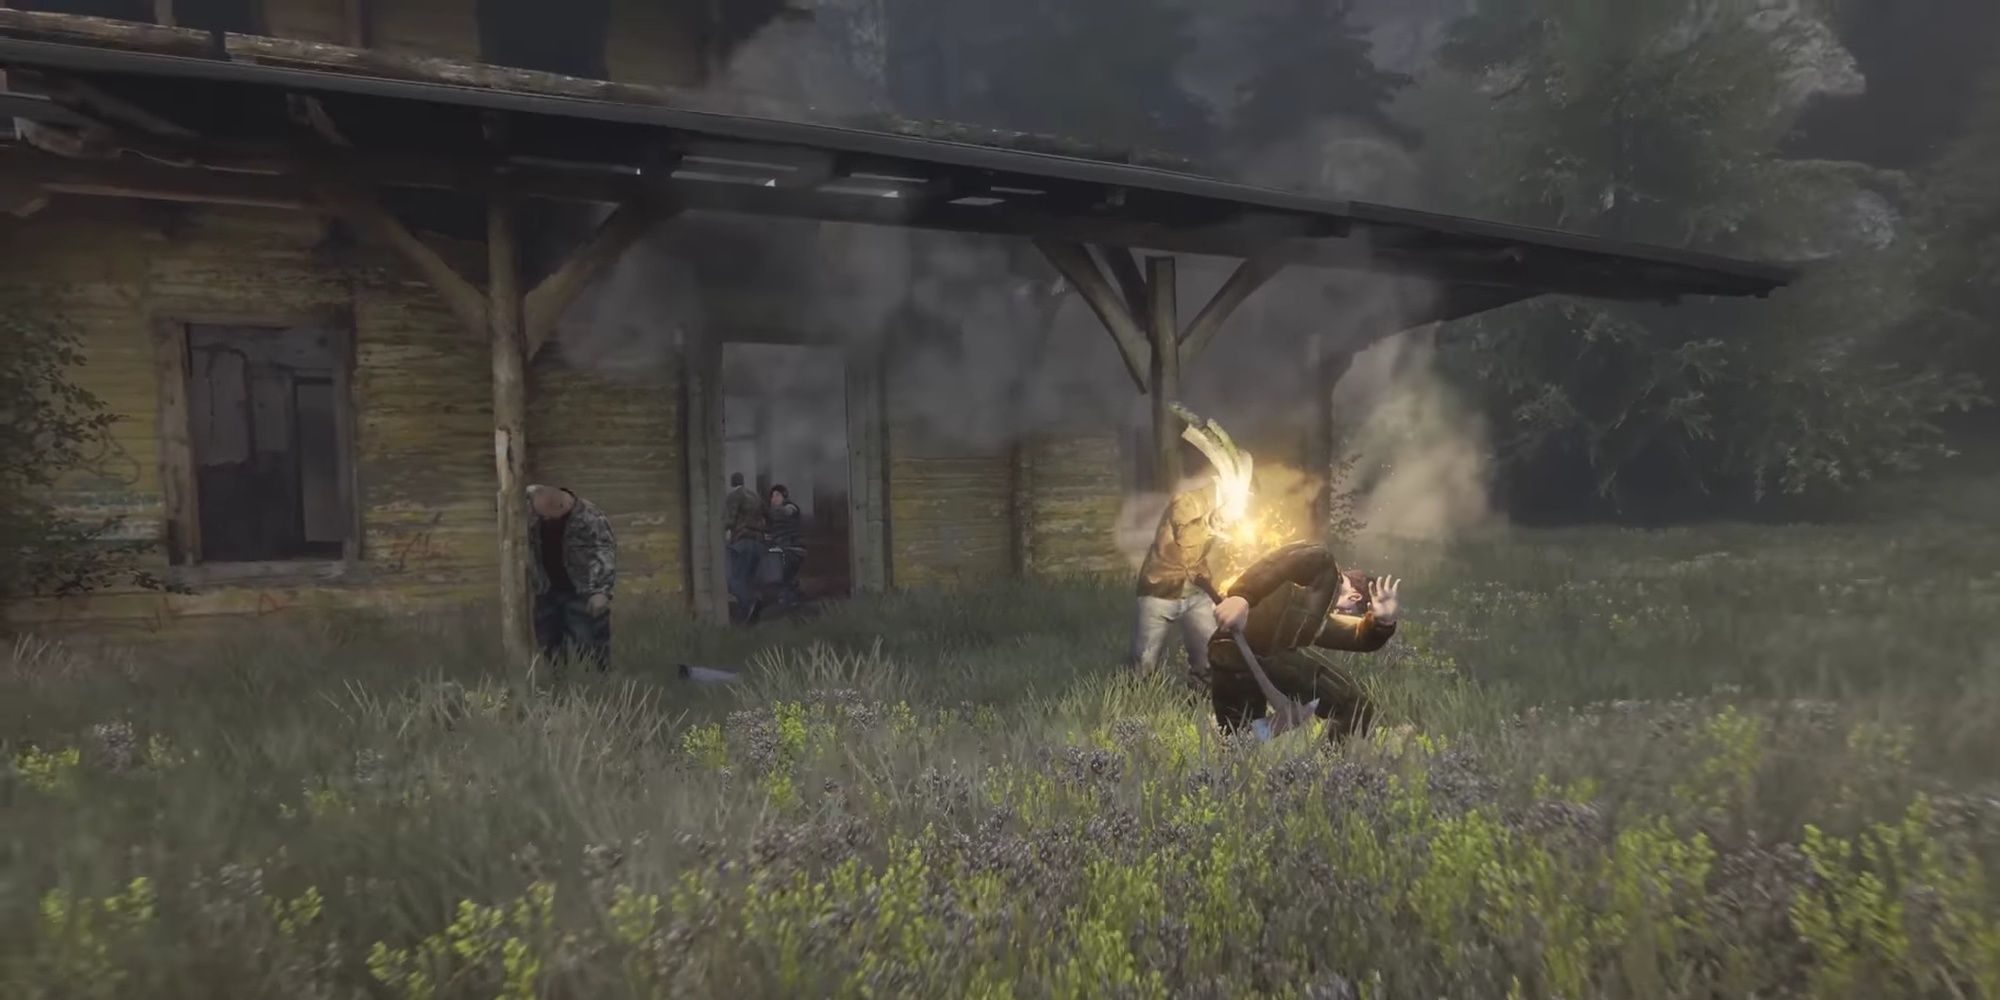 The Vanishing Of Ethan Carter: Members Of Ethans Family Dealing With A House Fire